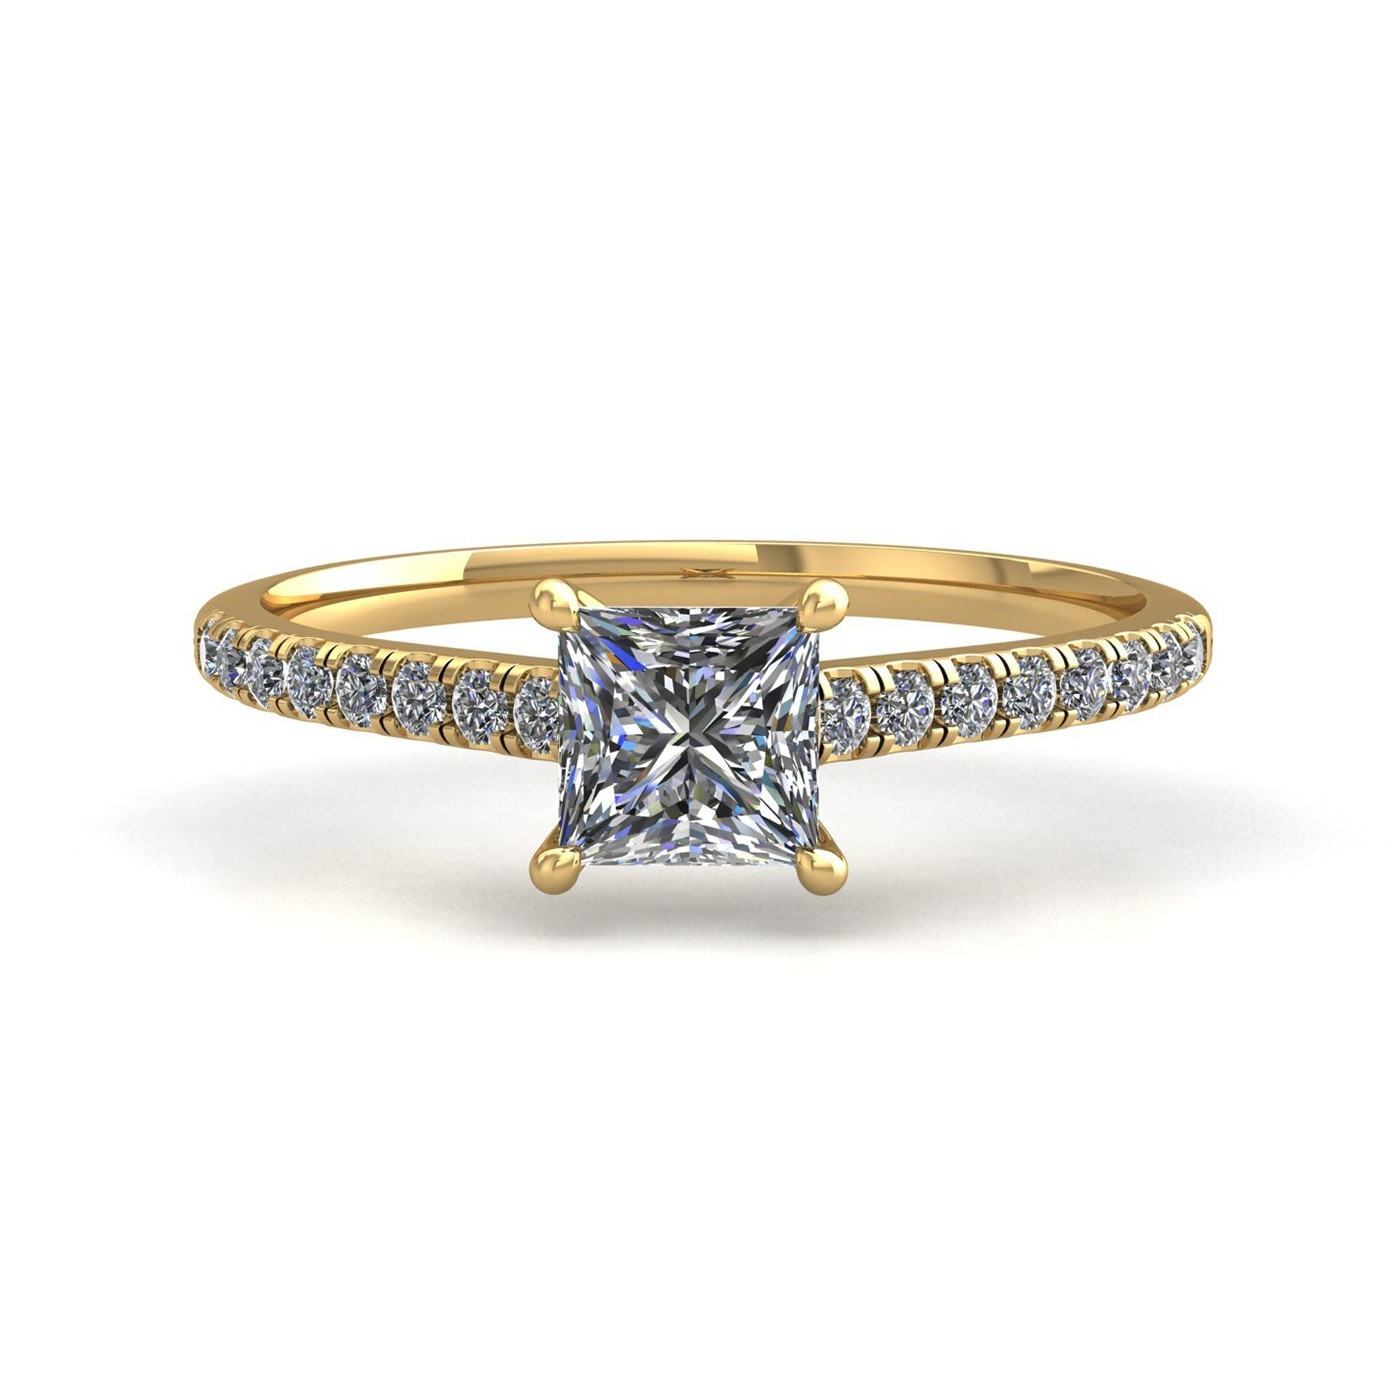 18k yellow gold 1,50 ct 4 prongs princess cut diamond engagement ring with whisper thin pavÉ set band Photos & images